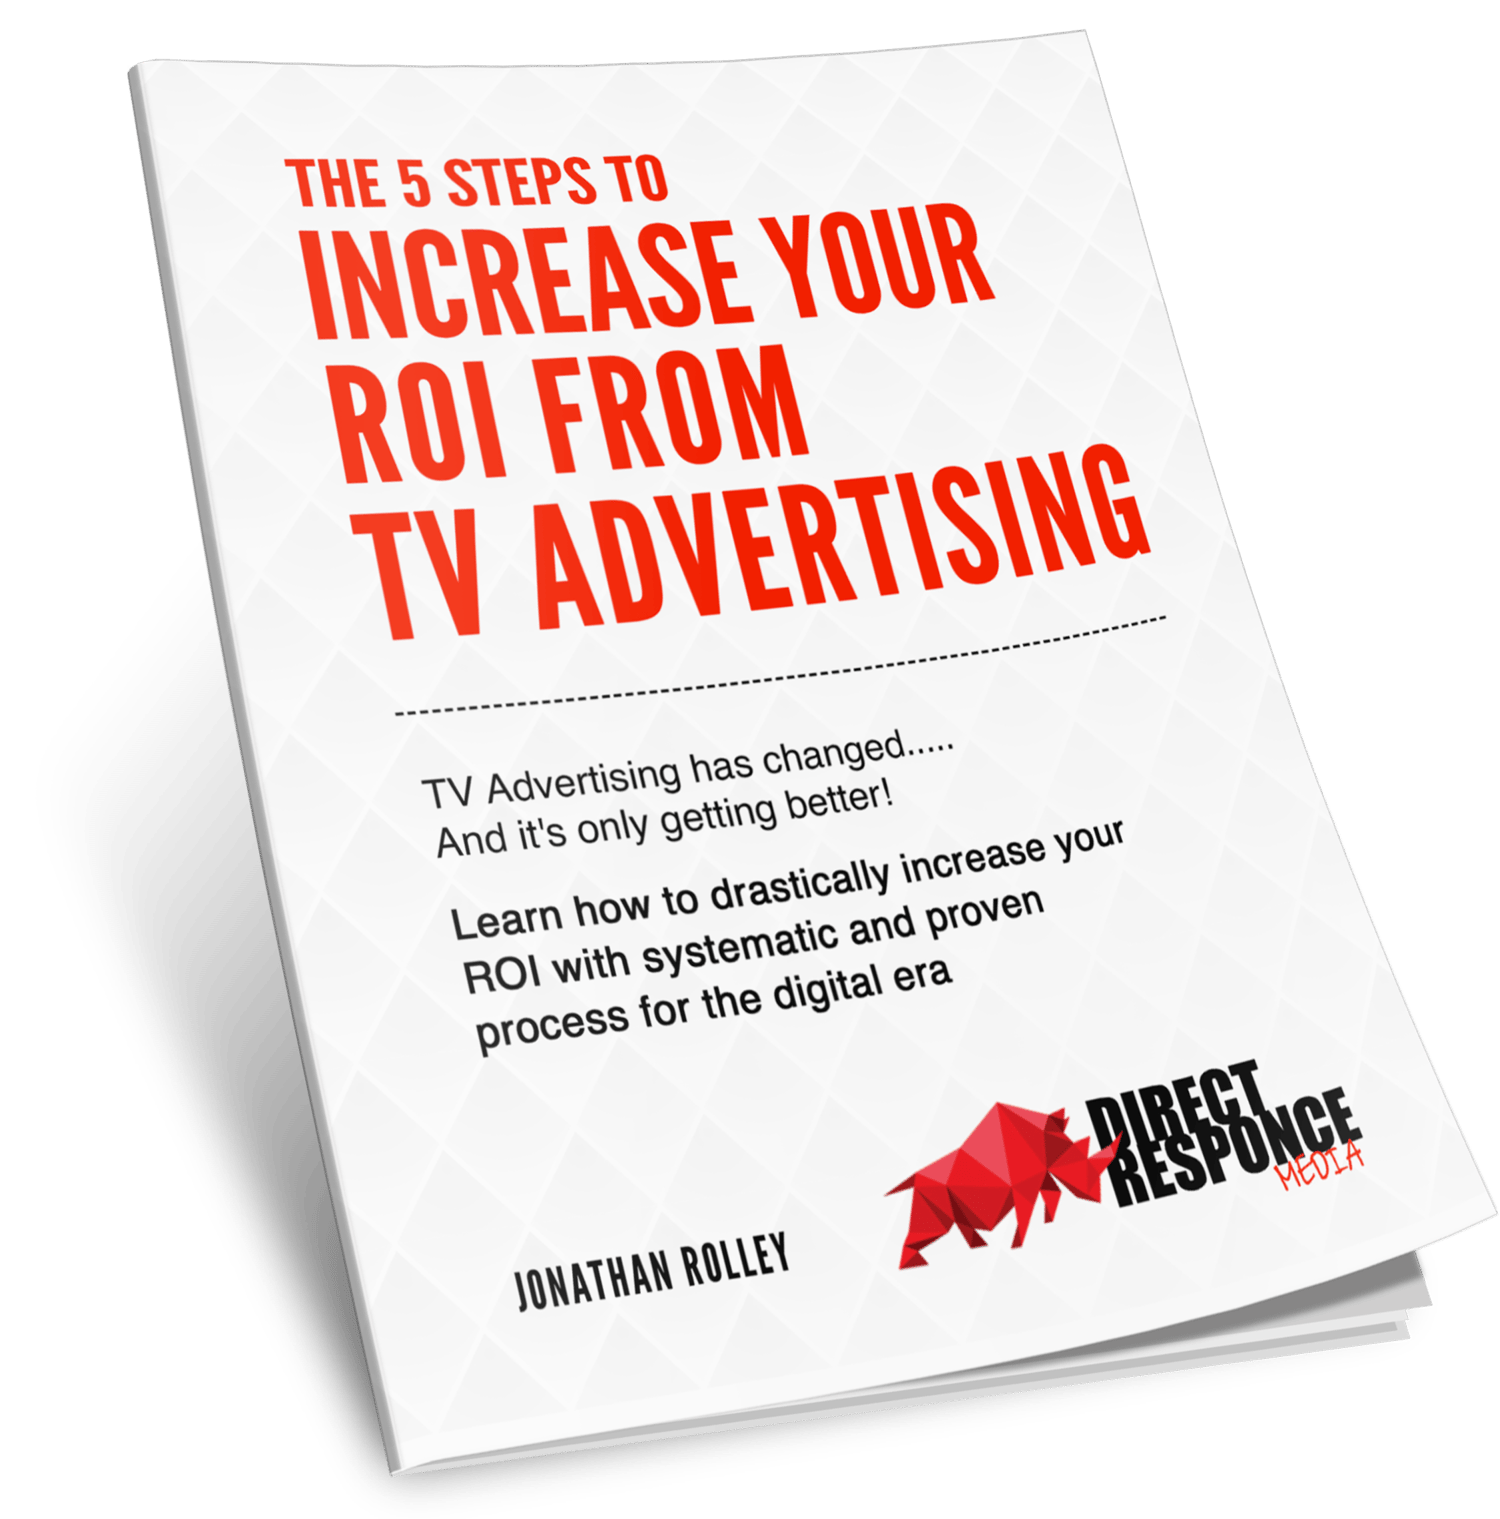 The 5 steps to ROI from your TV Advertising